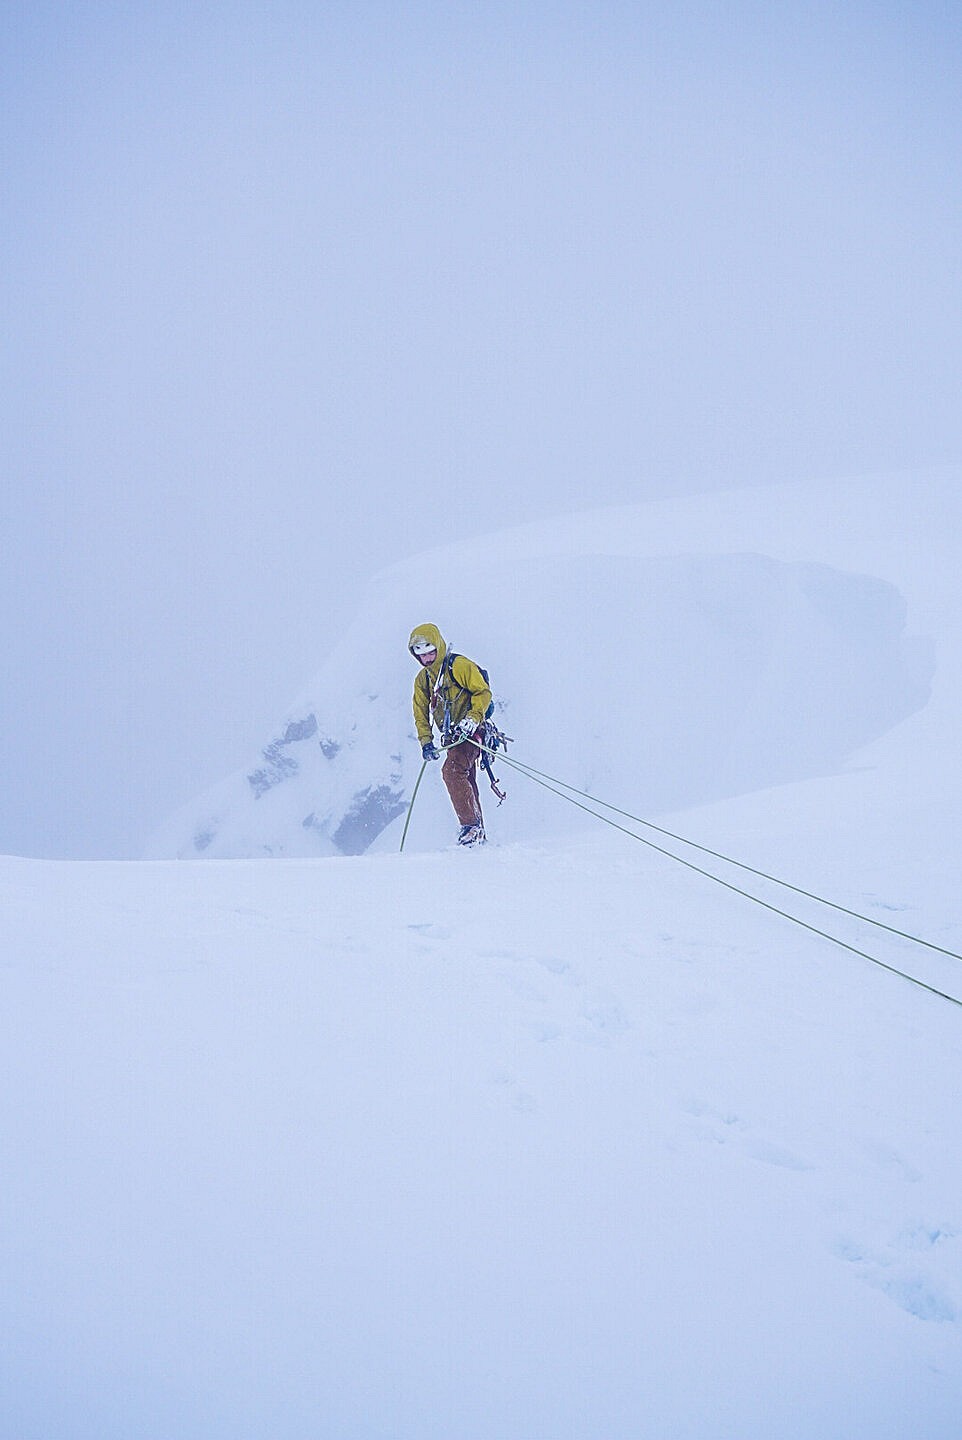 Dropping in at G4 after ascending up Ledge
Gully 4 Ben Nevis   © Cpdooley